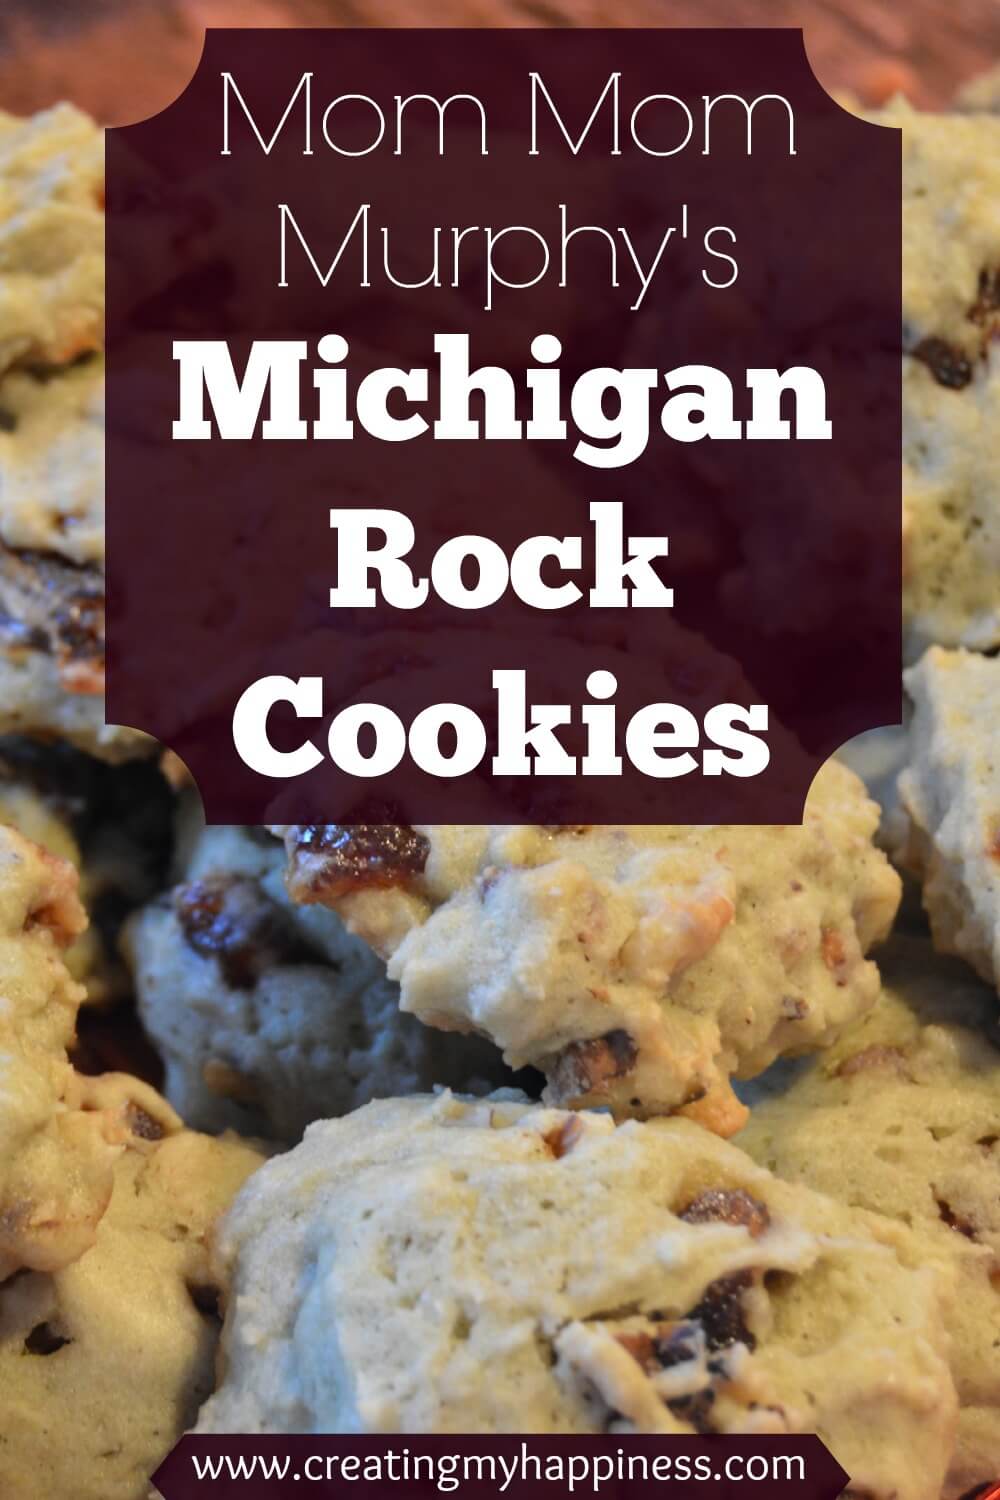 If you're looking for a soft, chewy, not too sweet cookie to serve for your event, look no further than Mom Mom Murphy's Michigan Rock Cookies!